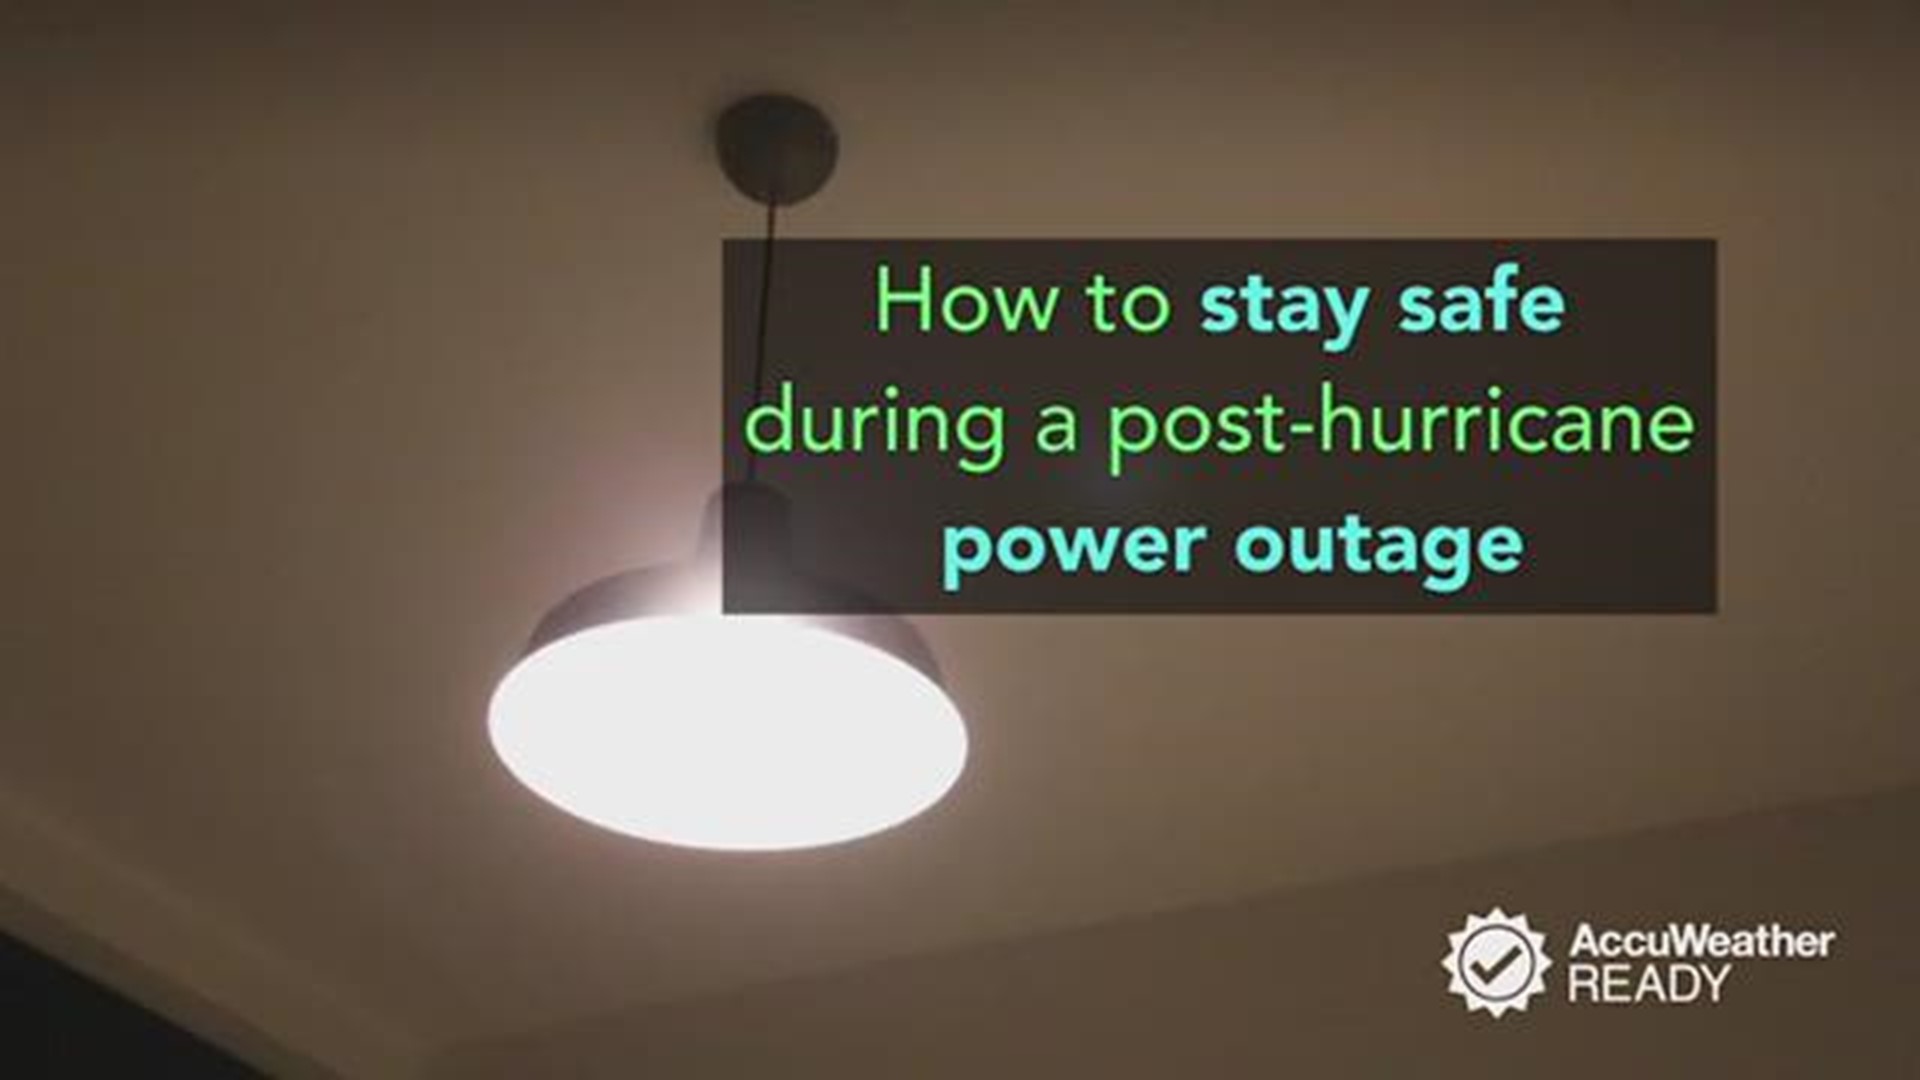 During severe weather, power outages add an extra element of danger. Follow these tips to protect yourself from electrocution, fire, carbon monoxide poisoning and death. 